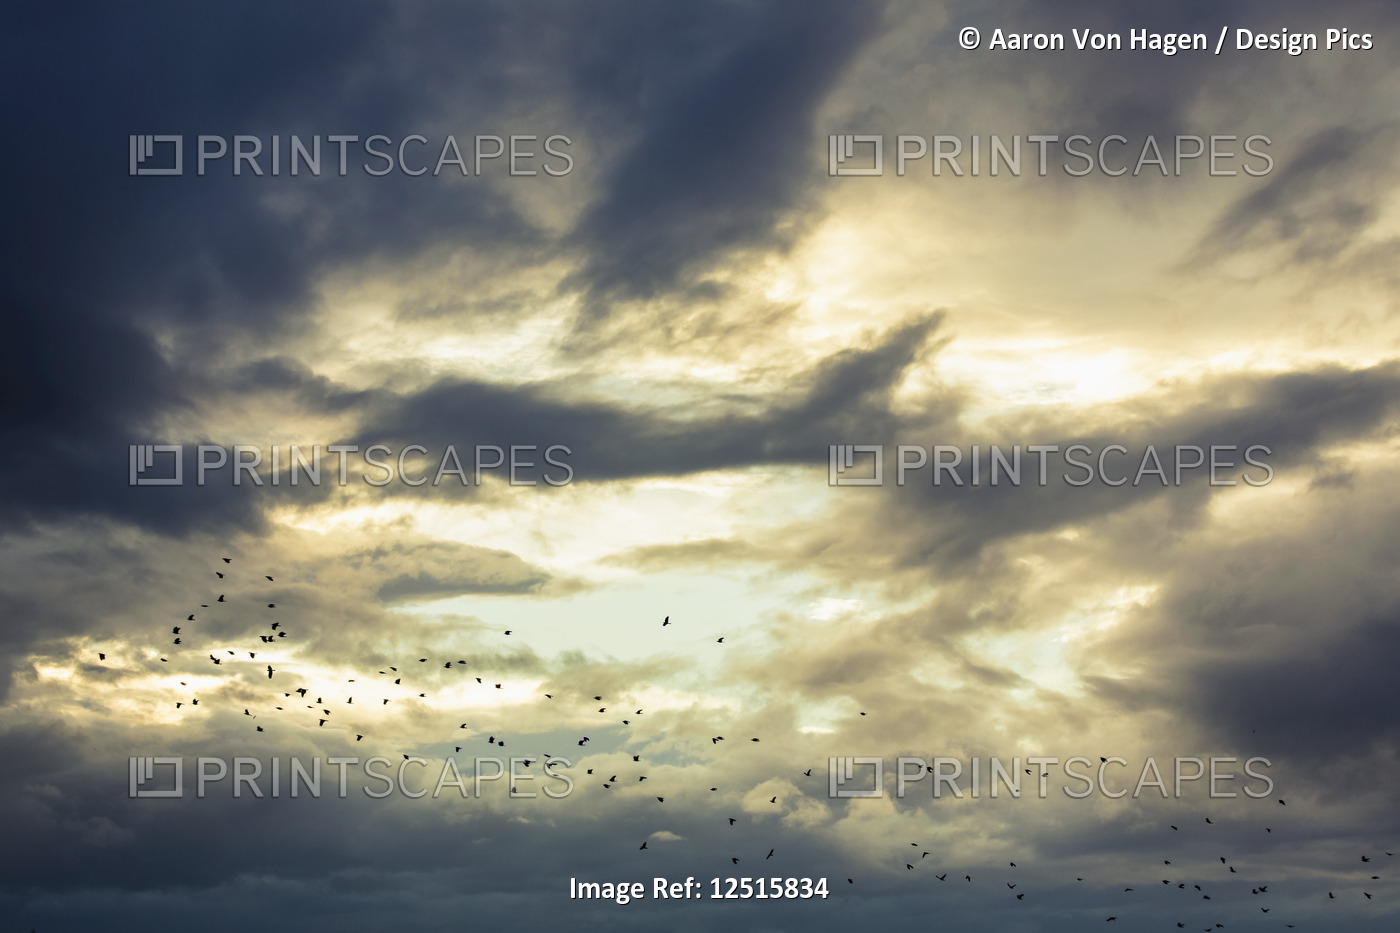 A flock of birds flying through illuminated clouds in the sky; Vancouver, ...